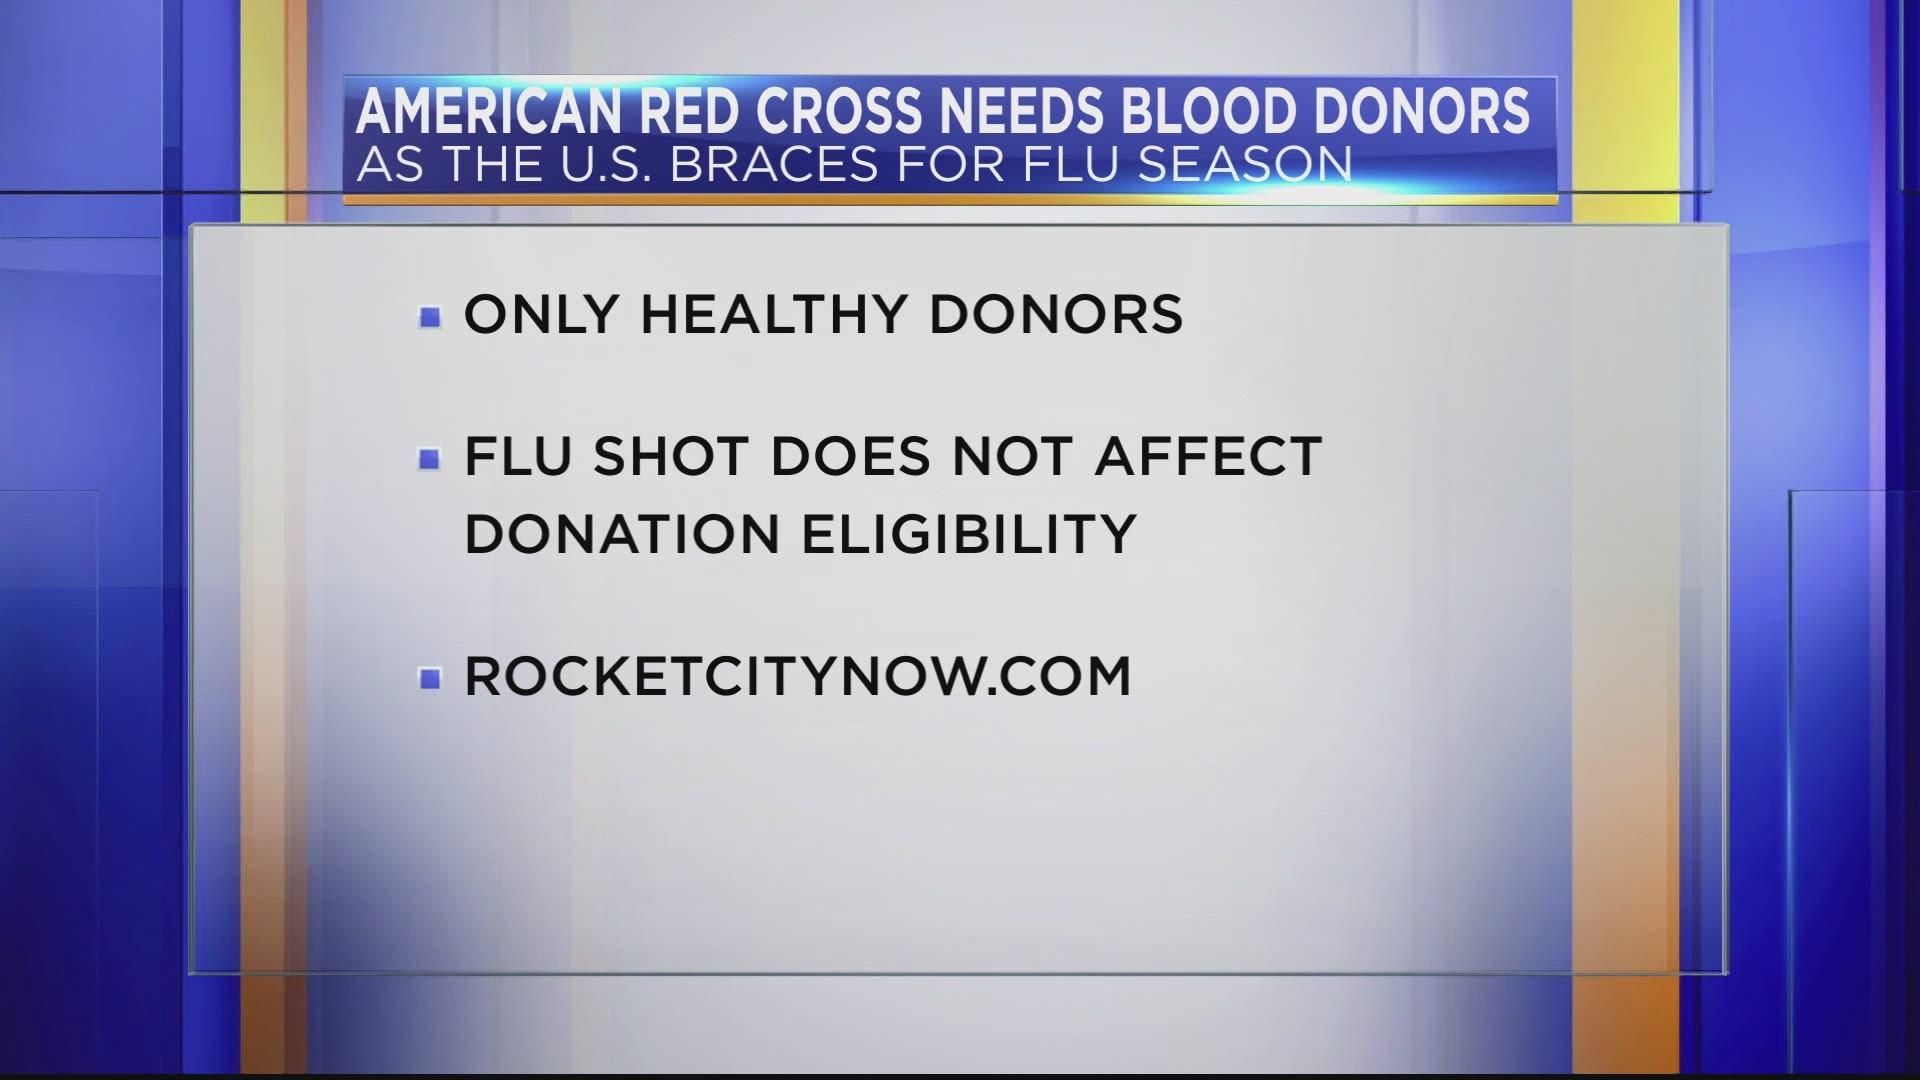 The American Red Cross (ARC) is encouraging people to get a flu vaccine this season in order to maintain a healthy population of eligible blood donors.